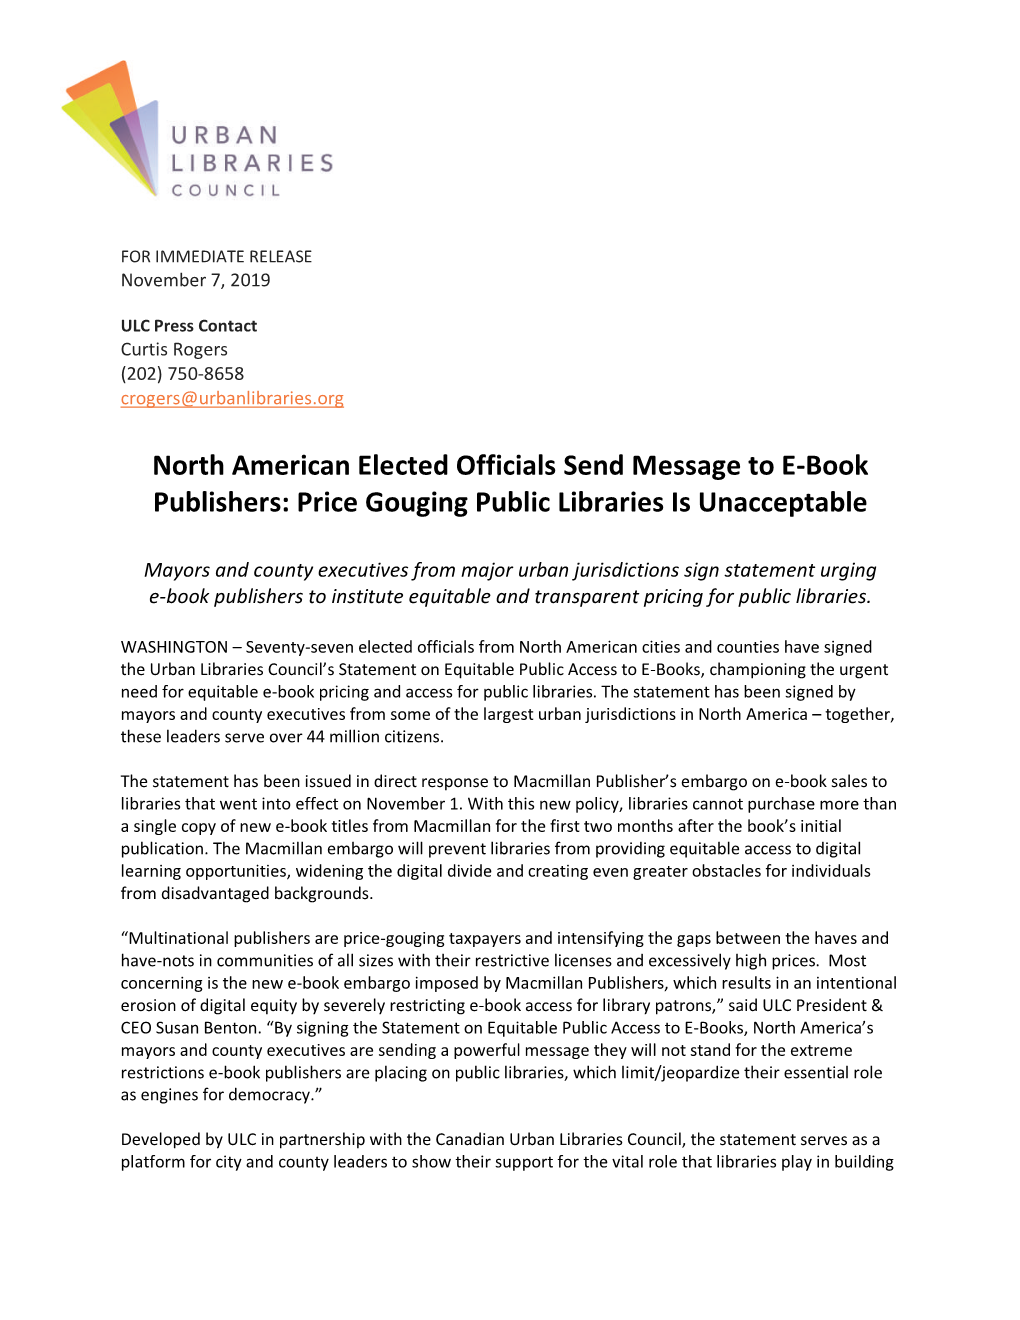 North American Elected Officials Send Message to E-Book Publishers: Price Gouging Public Libraries Is Unacceptable